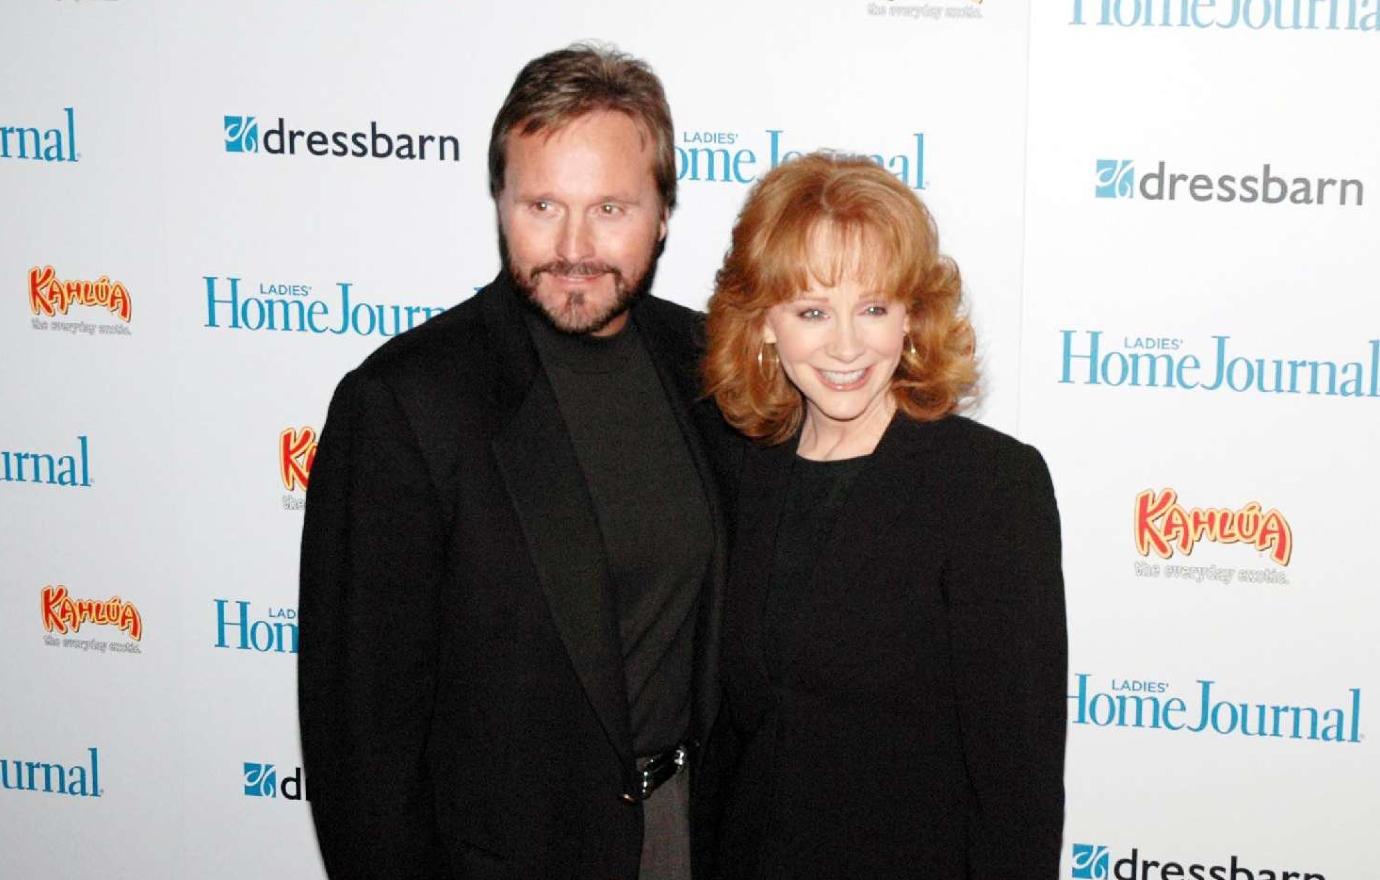 Why did Narvel Blackstock, Reba Mc Entire's Ex-Husband, and They Got Divorced?